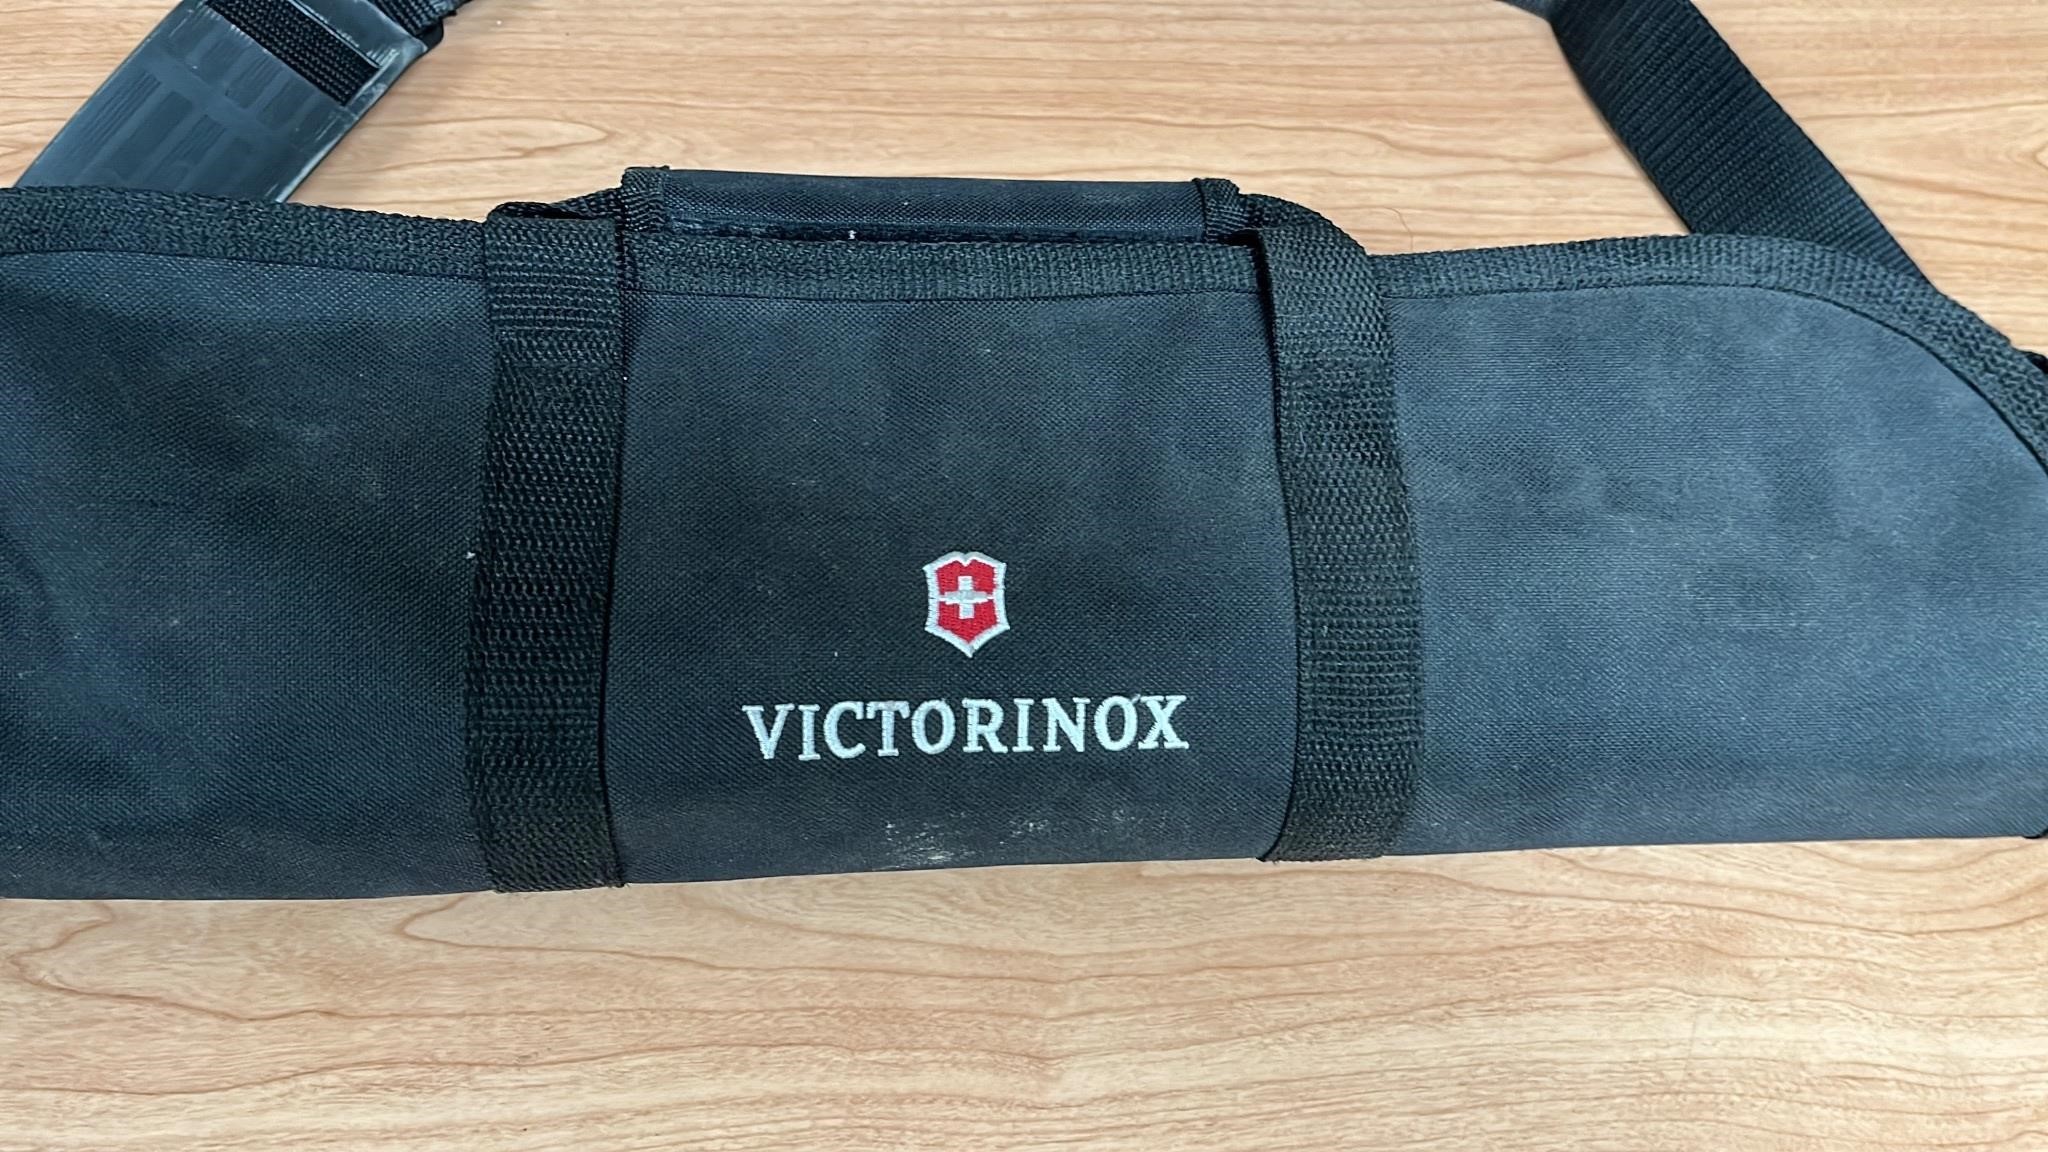 VICTORINOX Cutlery Knife Set with tote